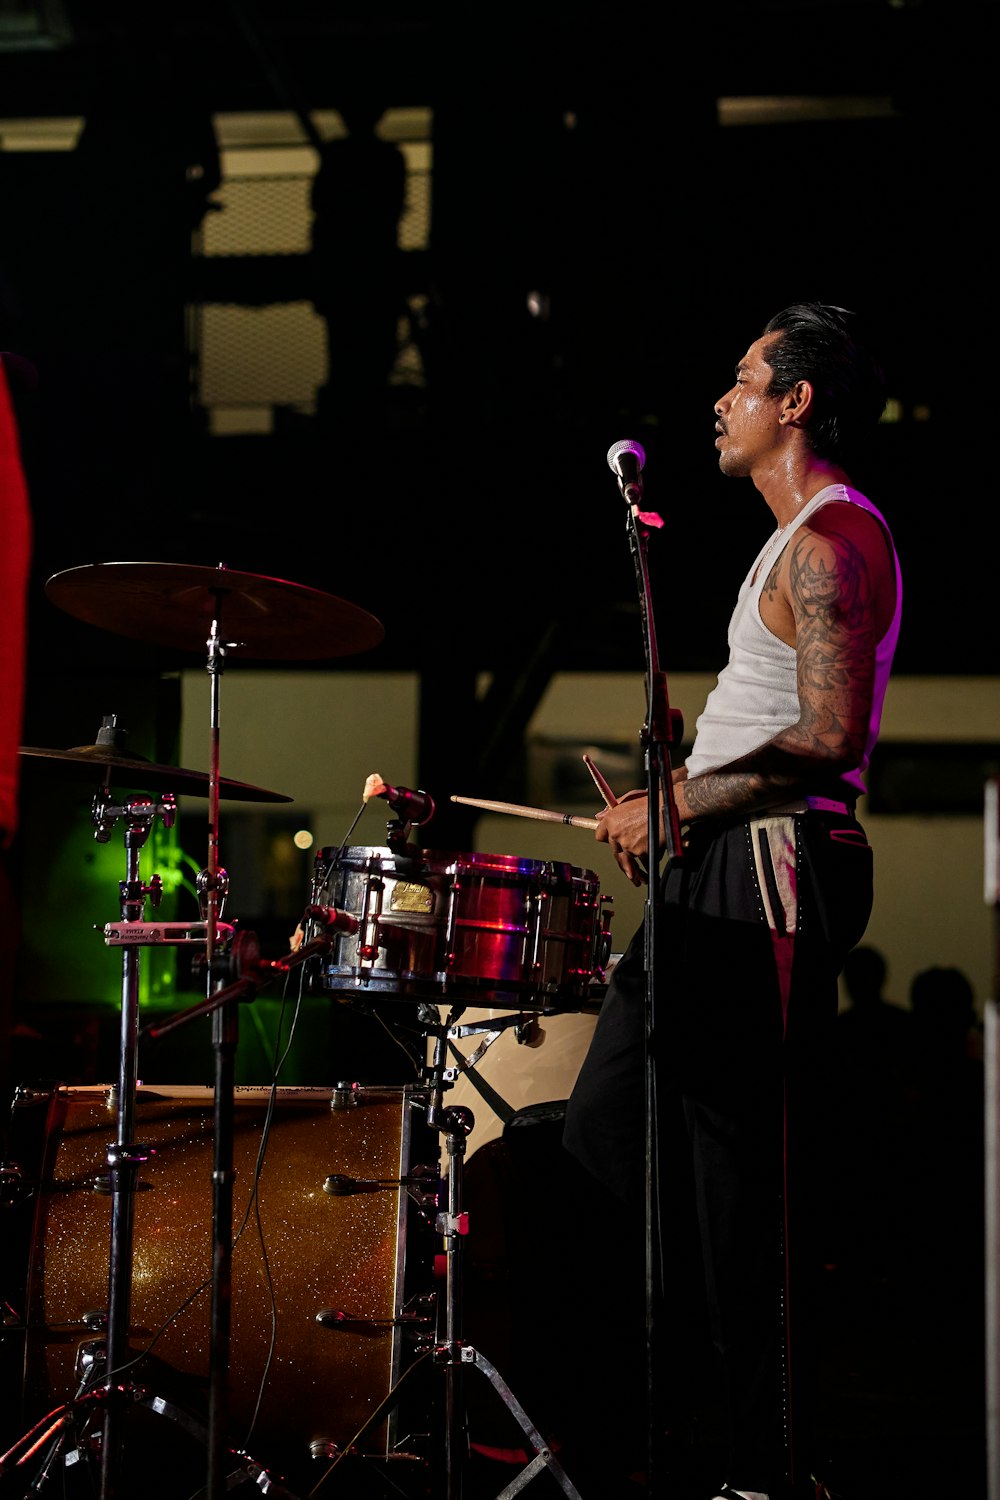 a man with a tattoo on his arm playing drums